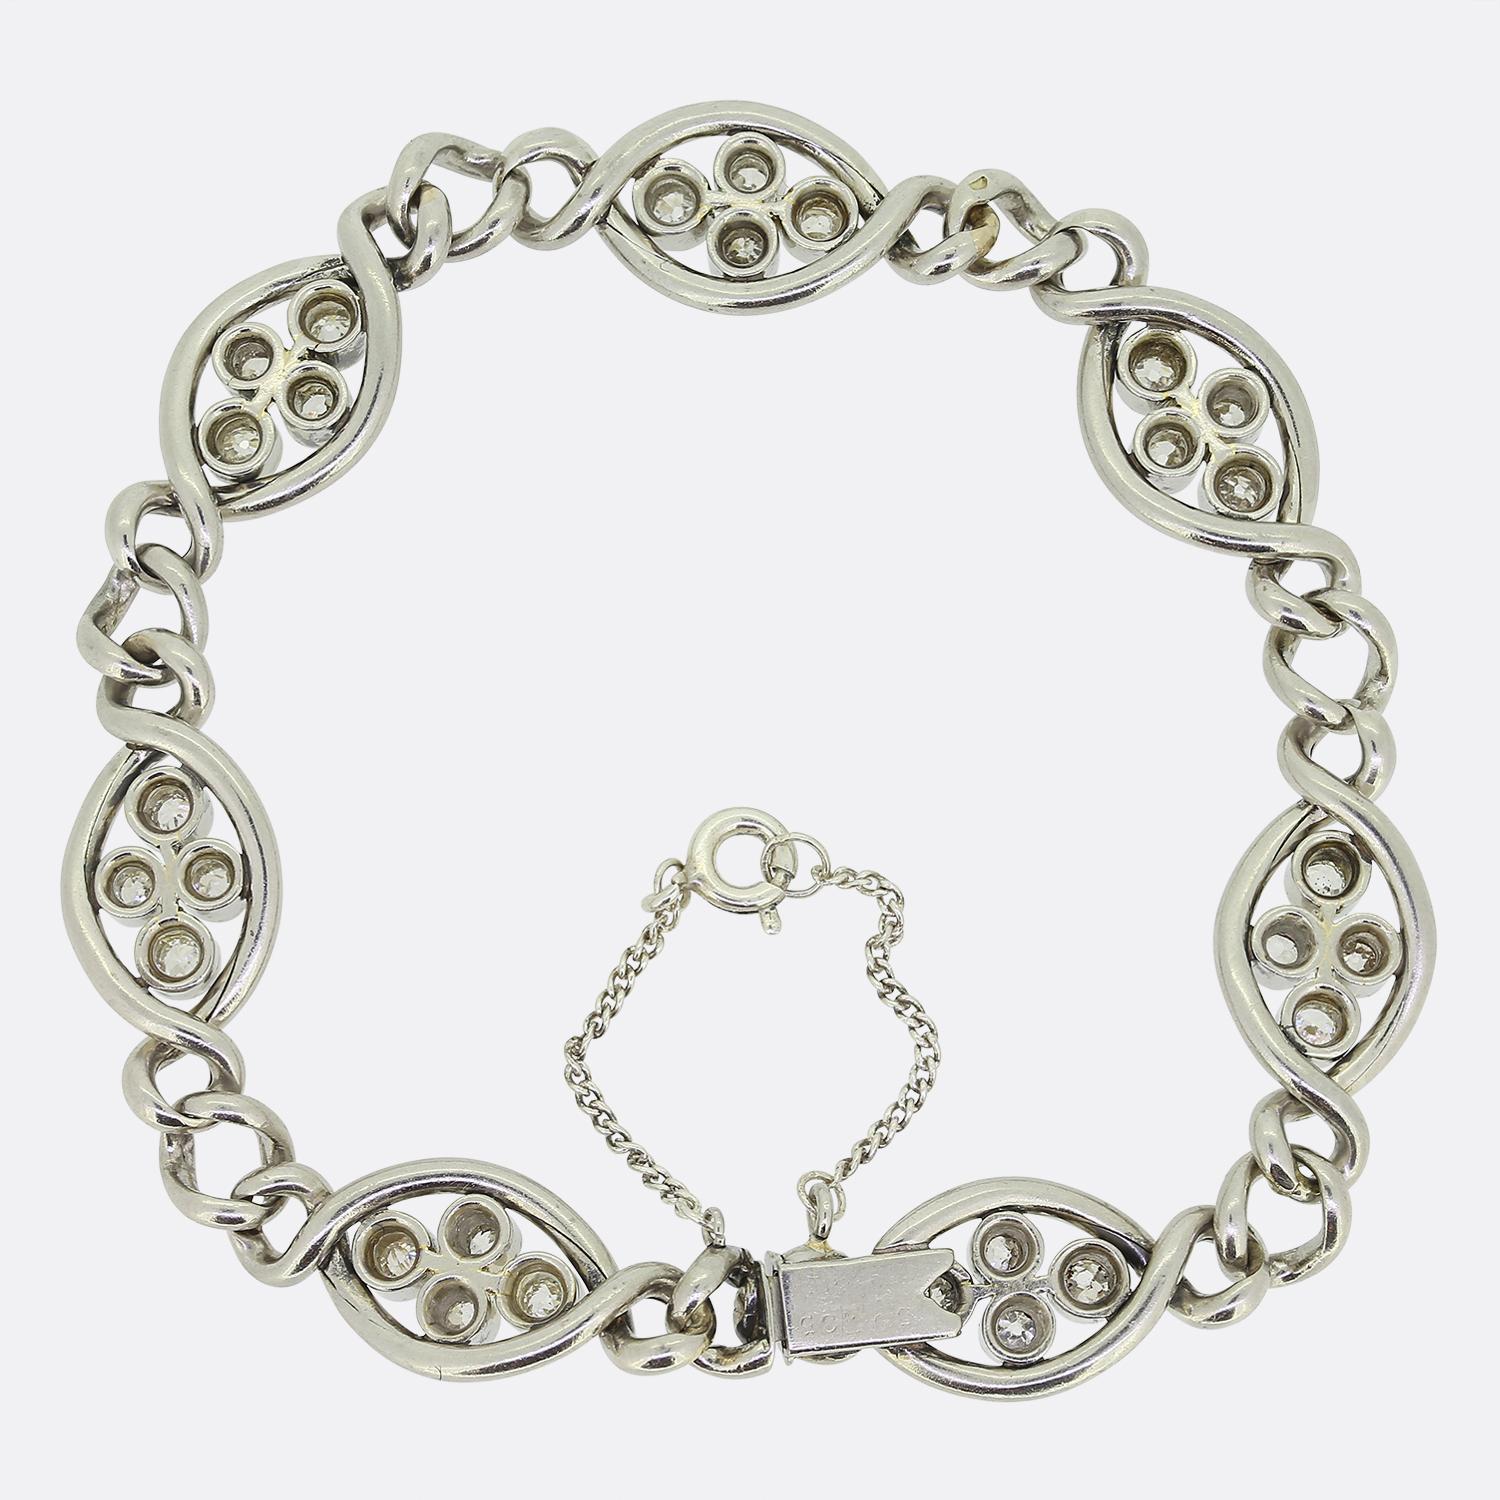 Here we have a gorgeous antique diamond chain bracelet. This French piece has been crafted from platinum during the pinnacle of the Art Deco movement and showcases seven open elliptical sections containing four individually bezel set round faceted